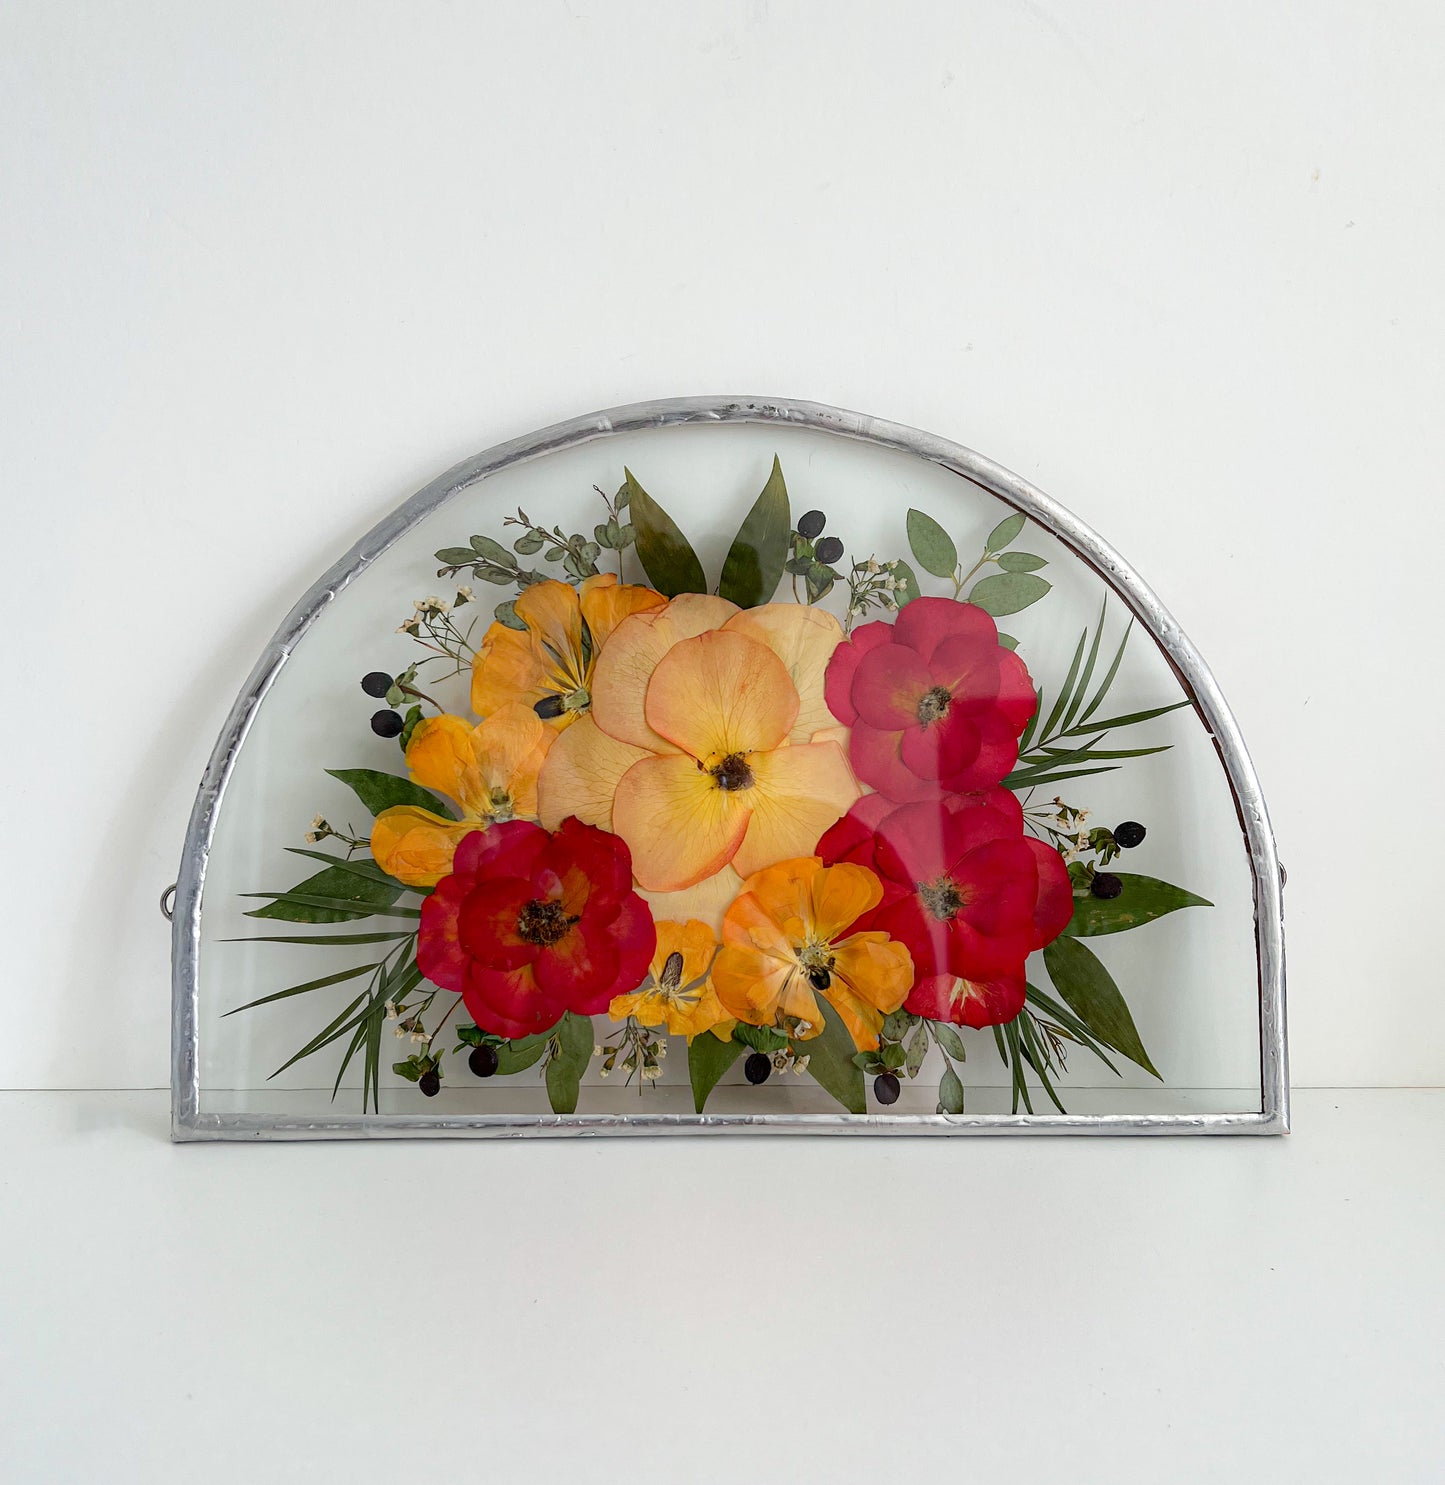 14x9 ARCHED FRAME